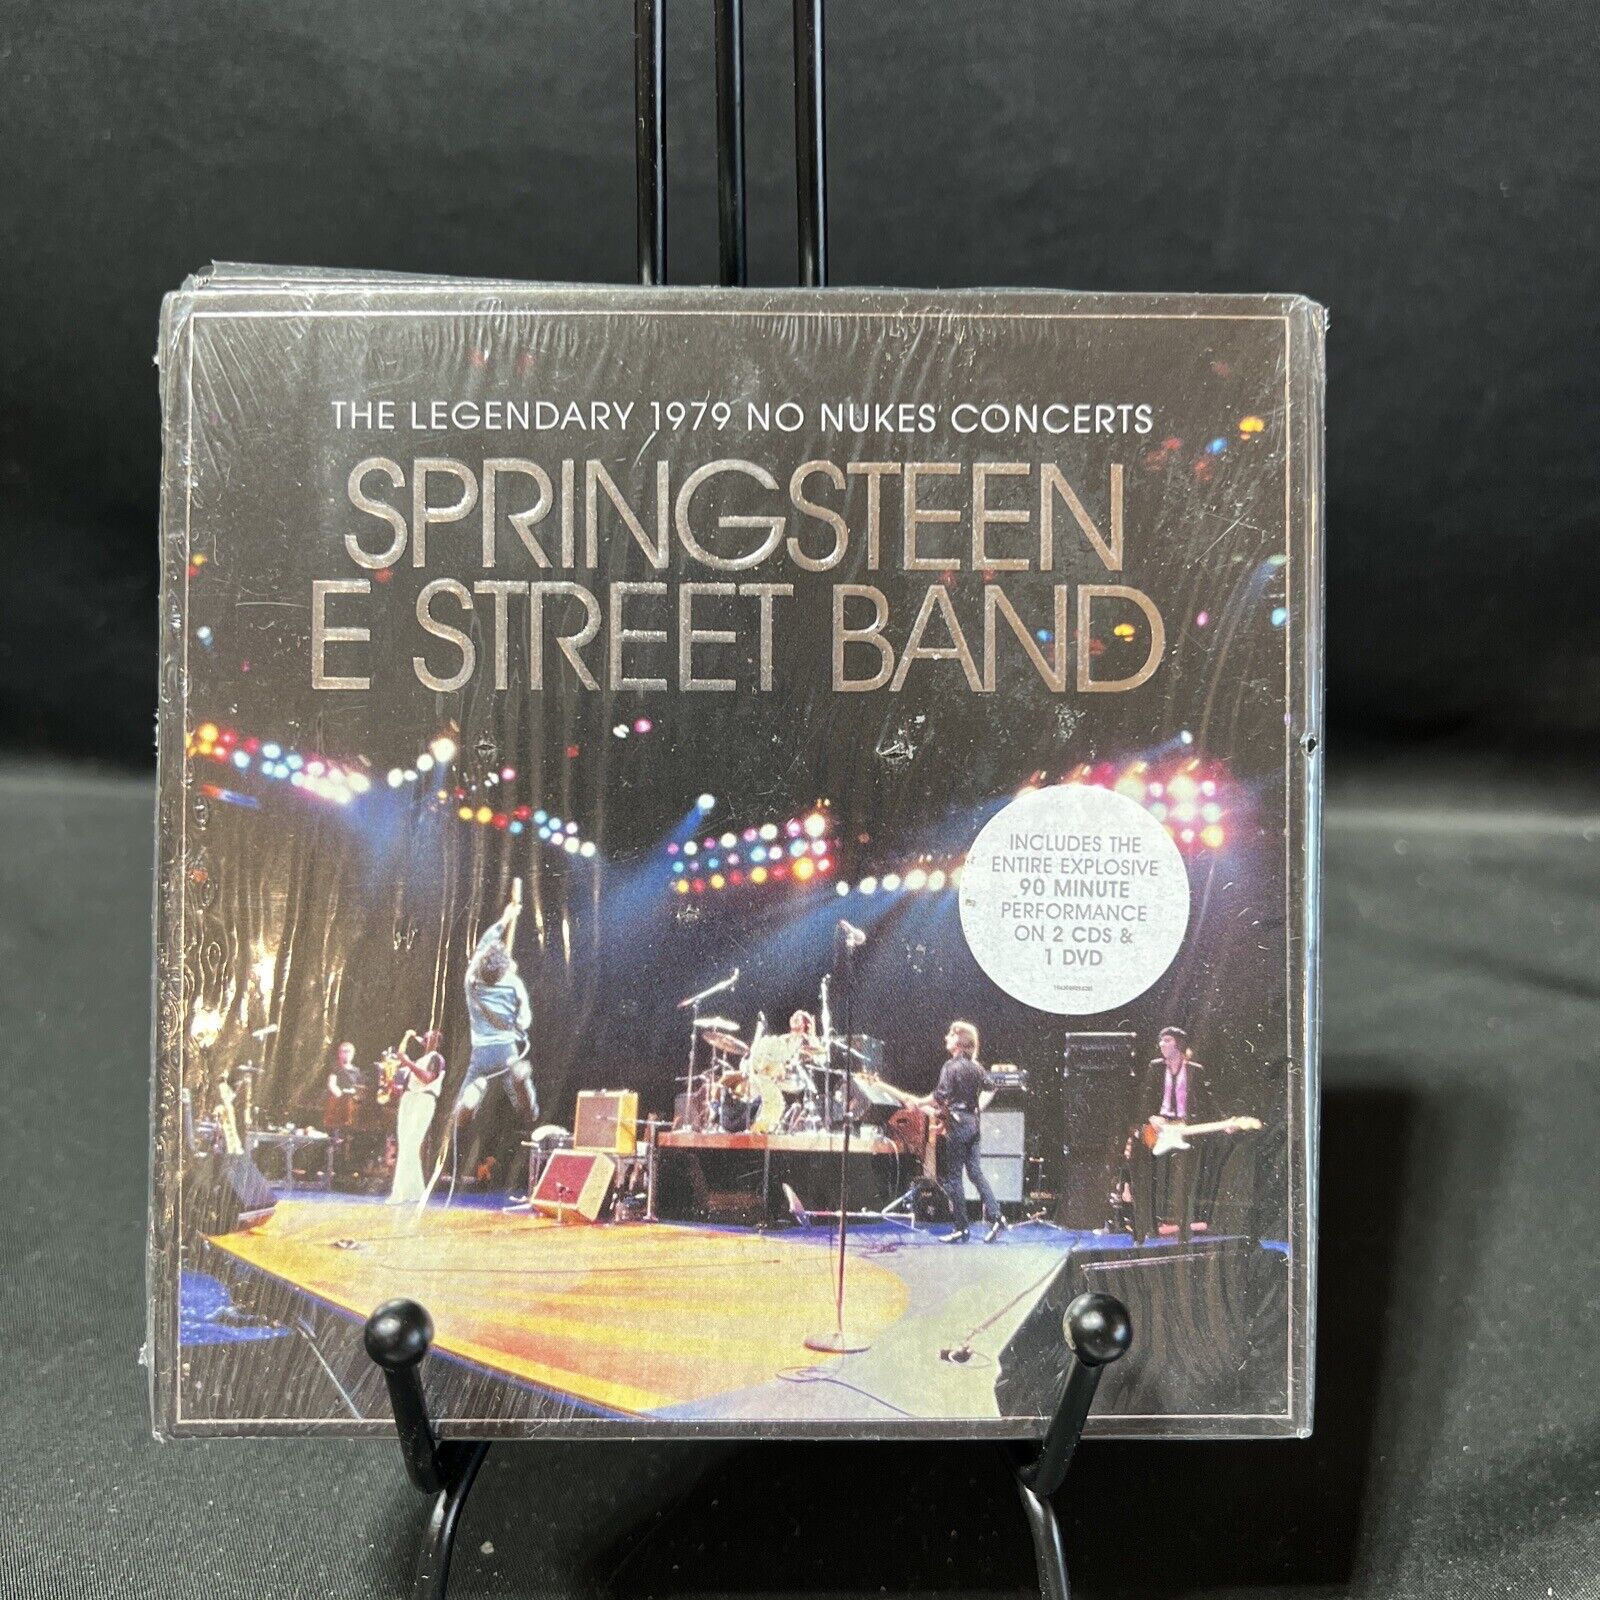 BRUCE SPRINGSTEEN LEGENDARY 1979 NO NUKES CONCERTS NEW CD & DVD